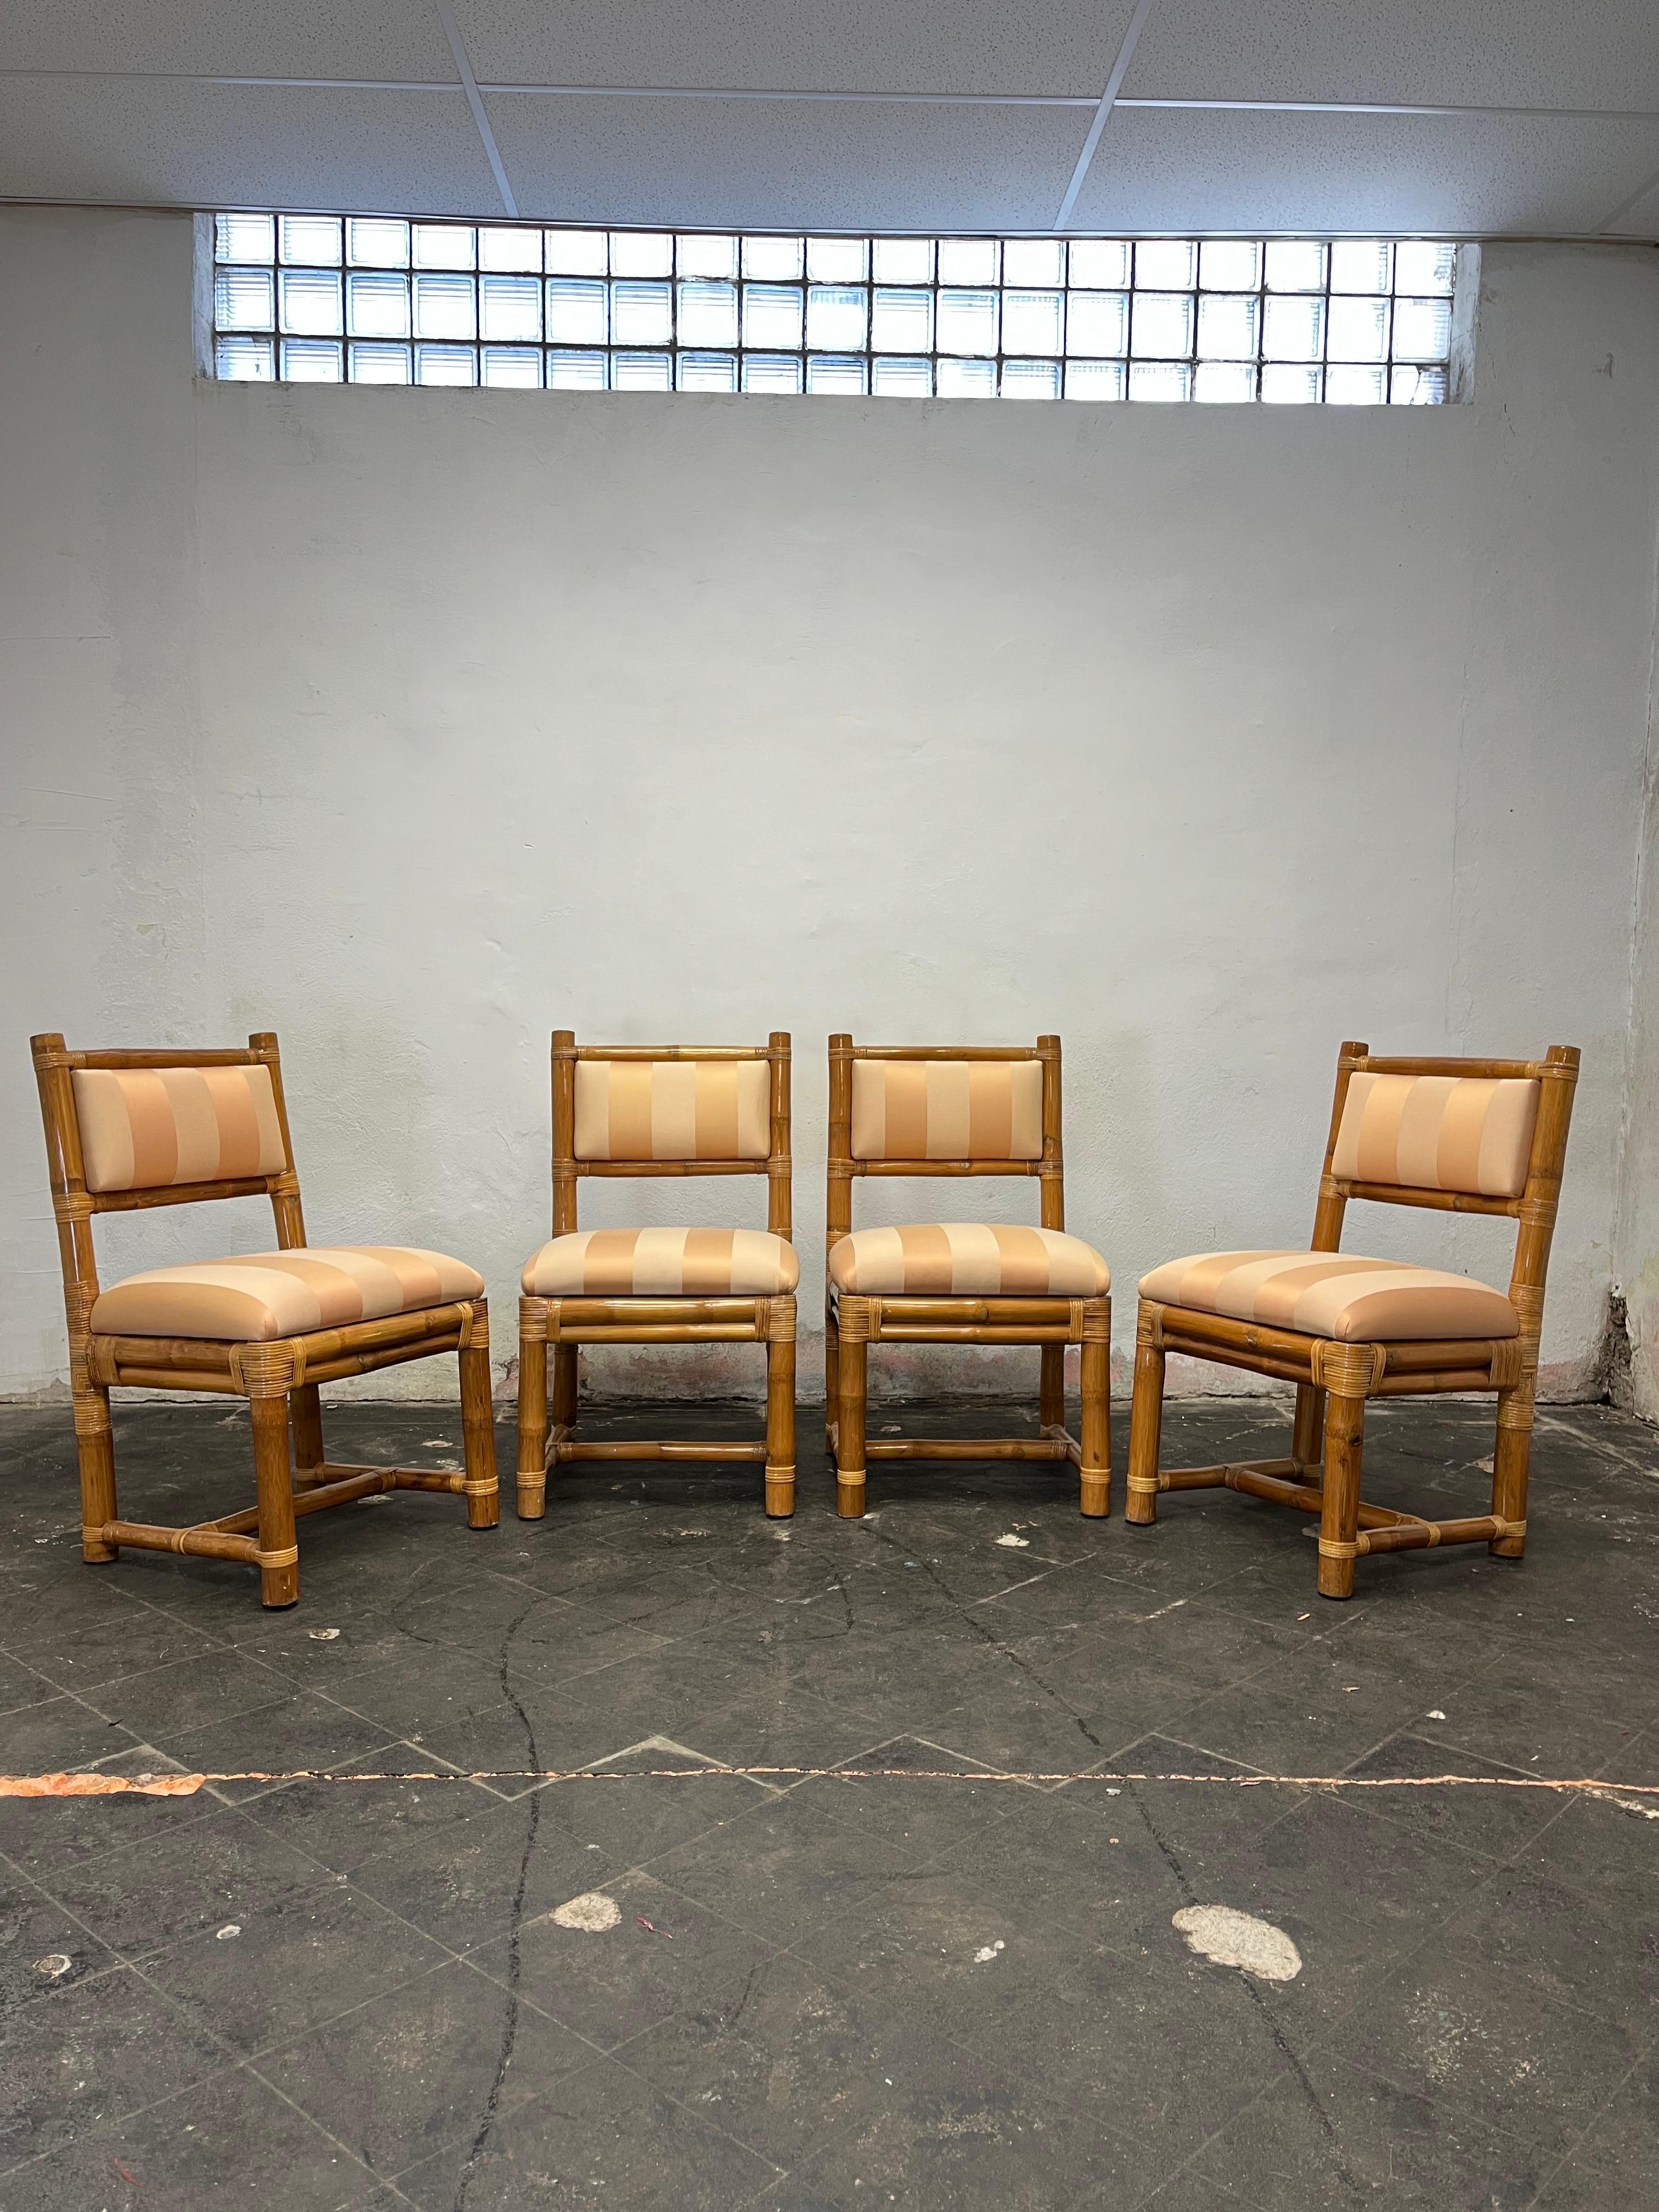 Fantastic Upholstered Elephant Bamboo Dining Chairs. Classic design that packs a punch.